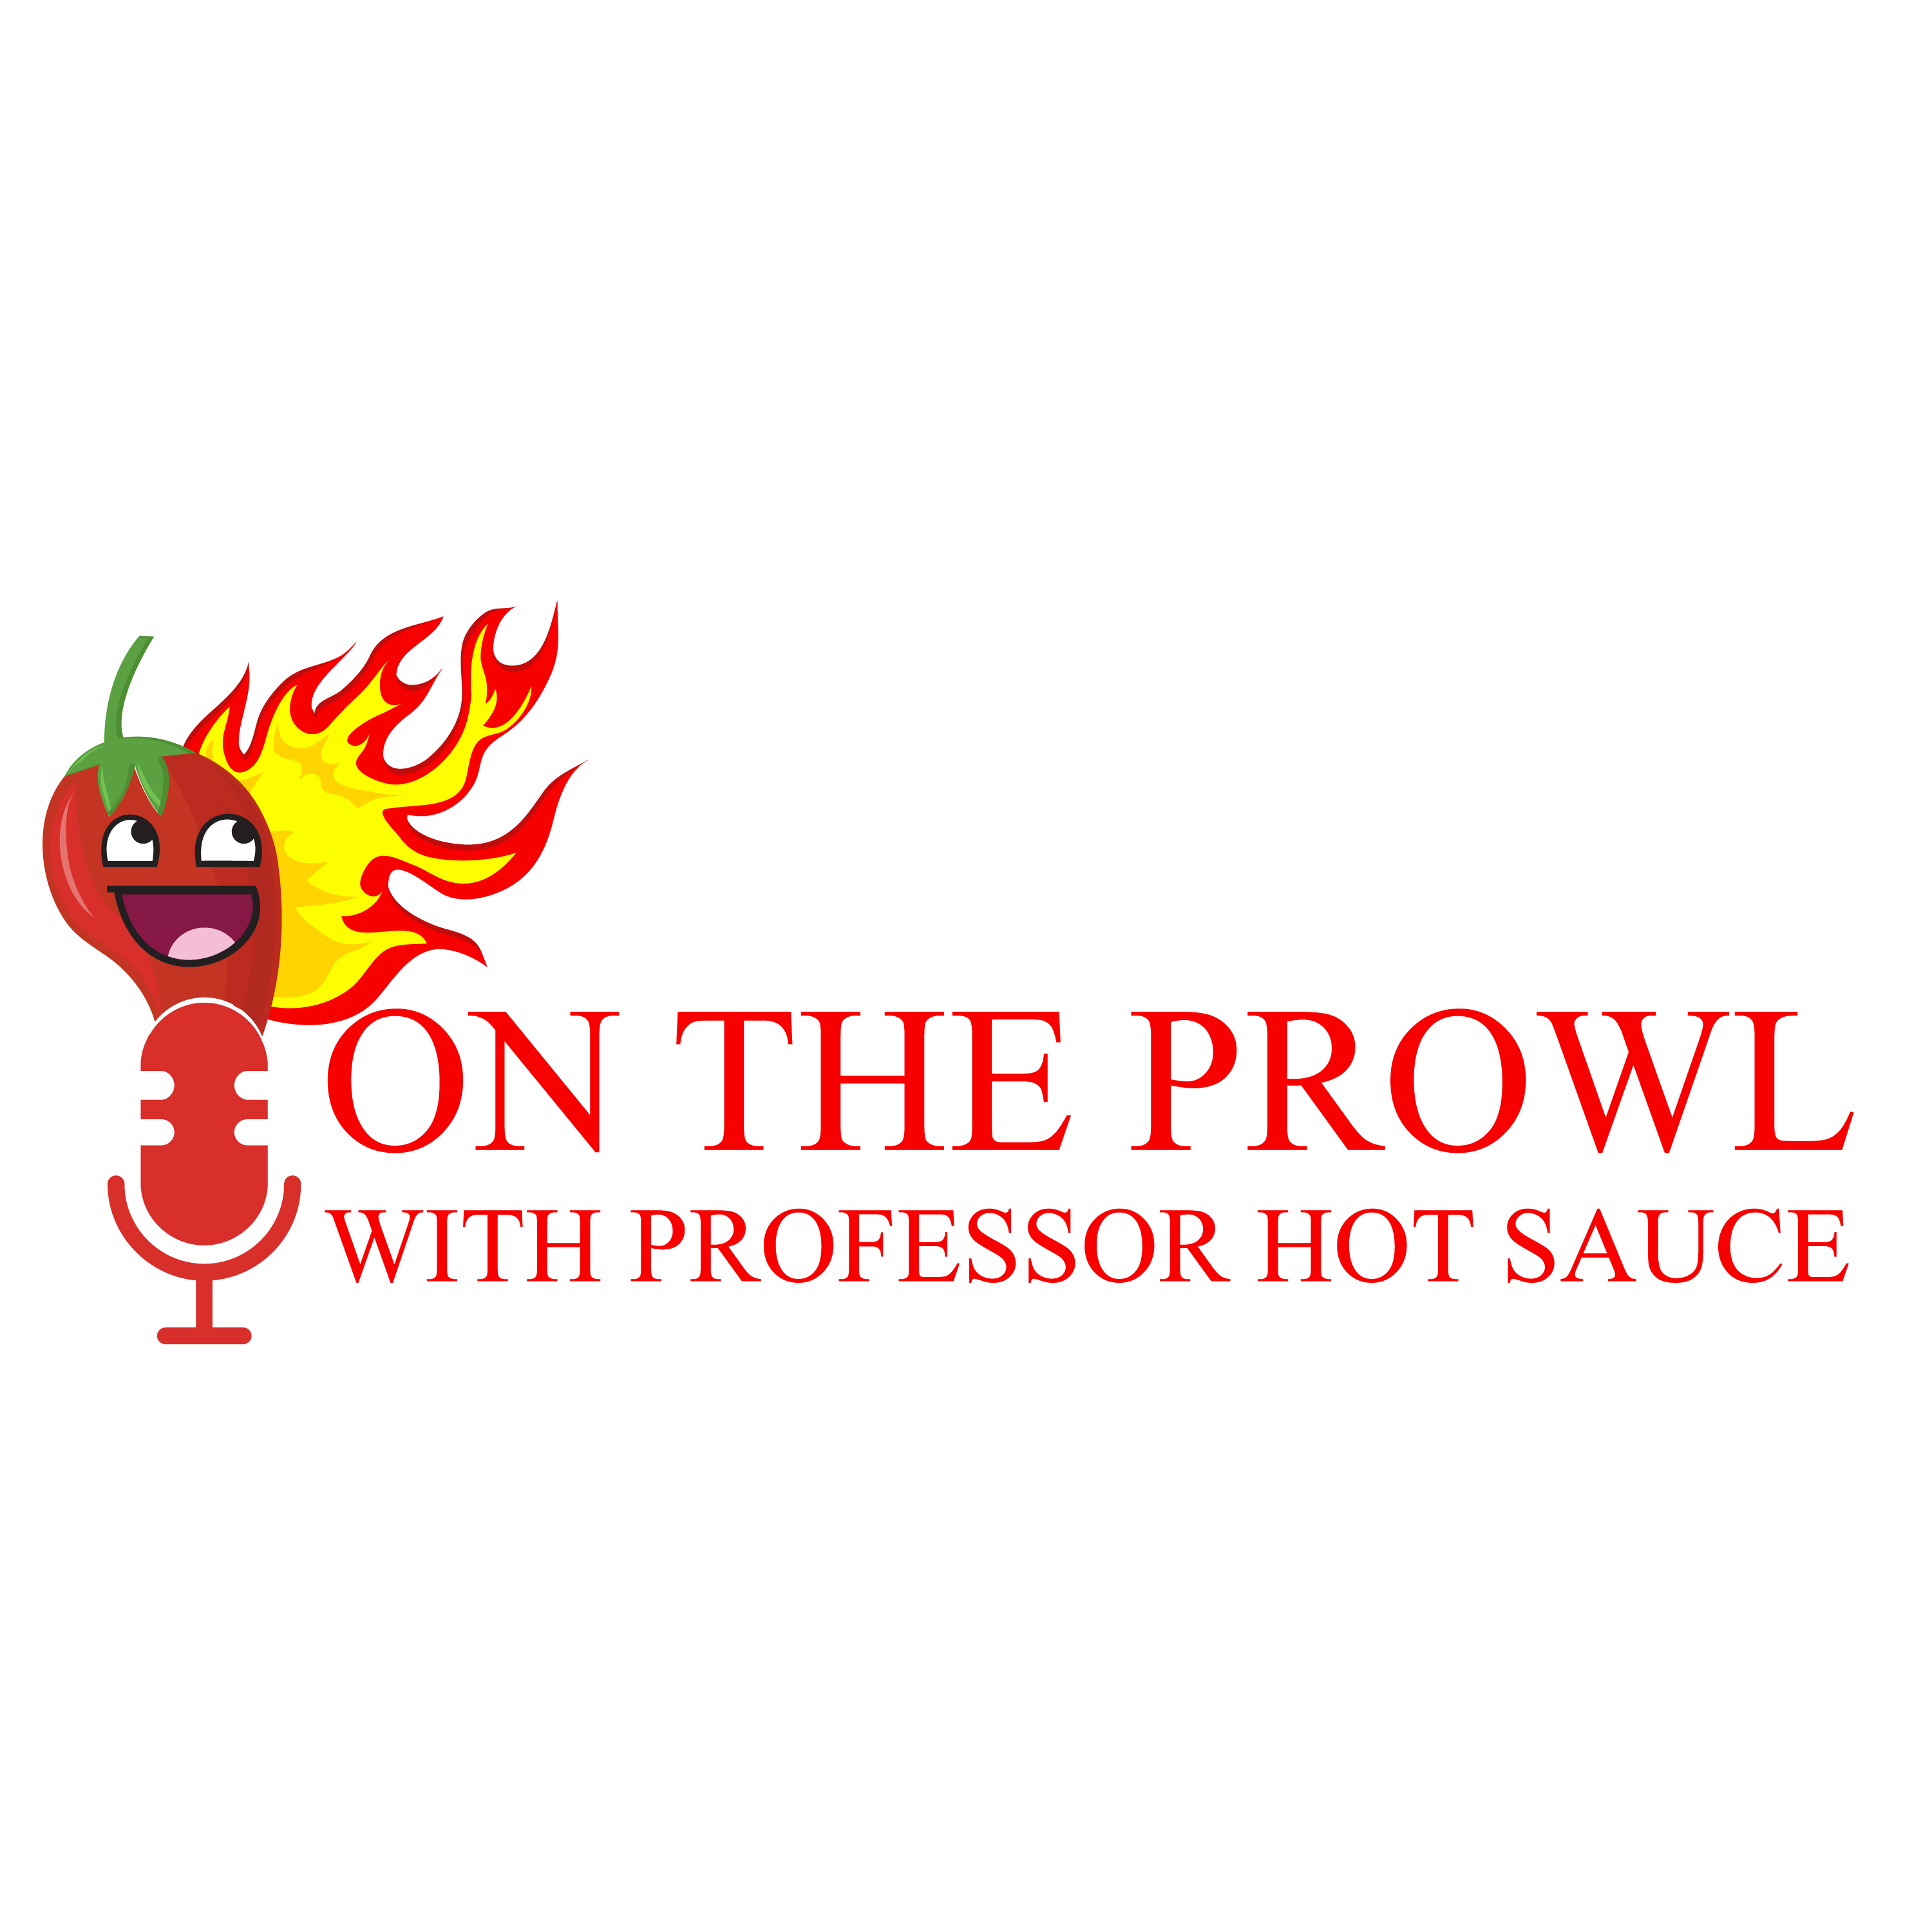 On the Prowl with Professor Hot Sauce